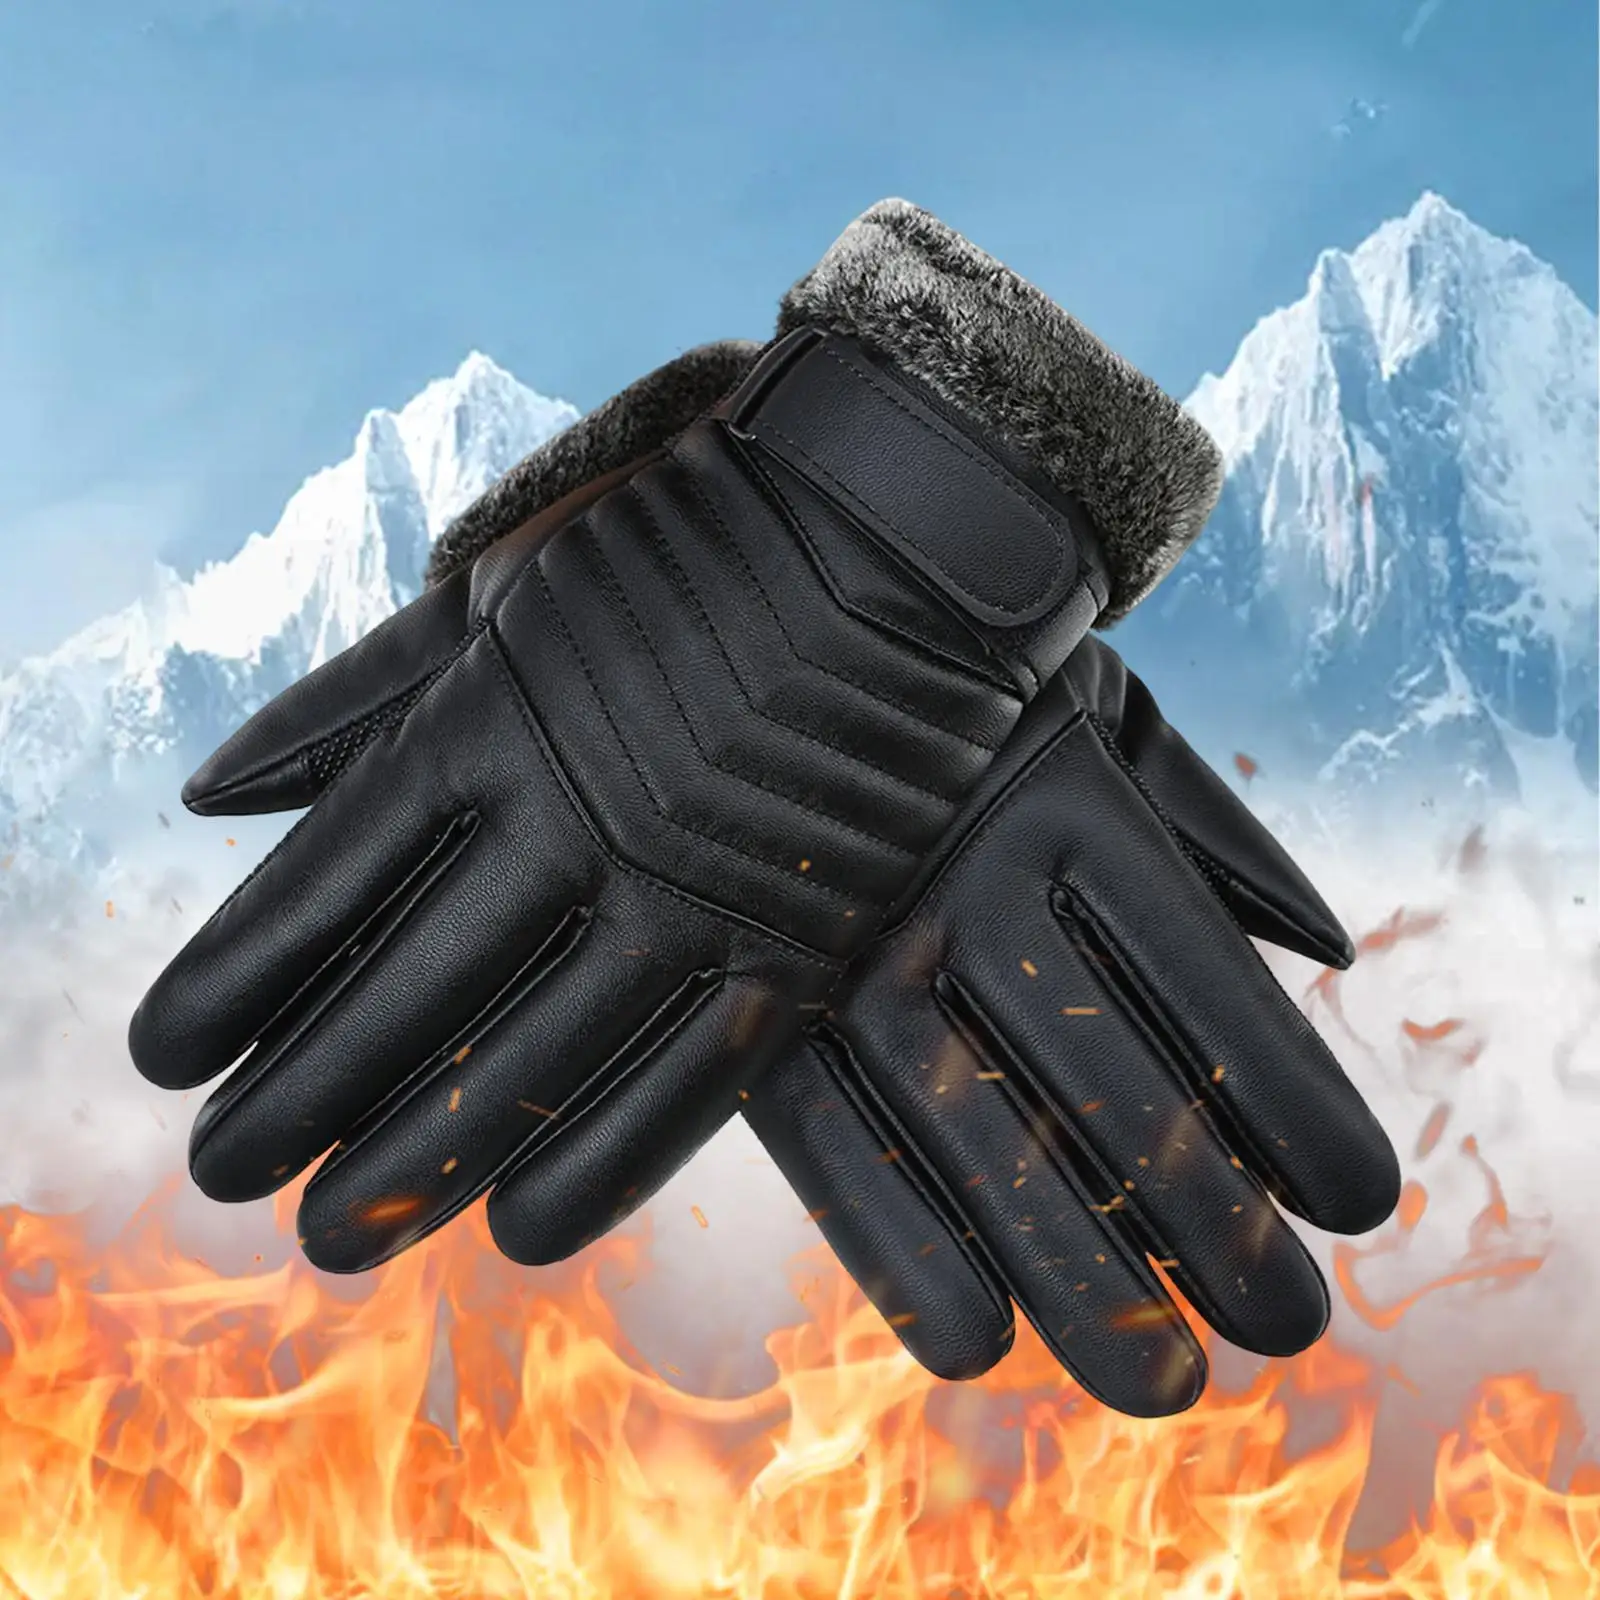 Winter Gloves Durable Windproof Mittens Warm Gloves for Men Camping Climbing